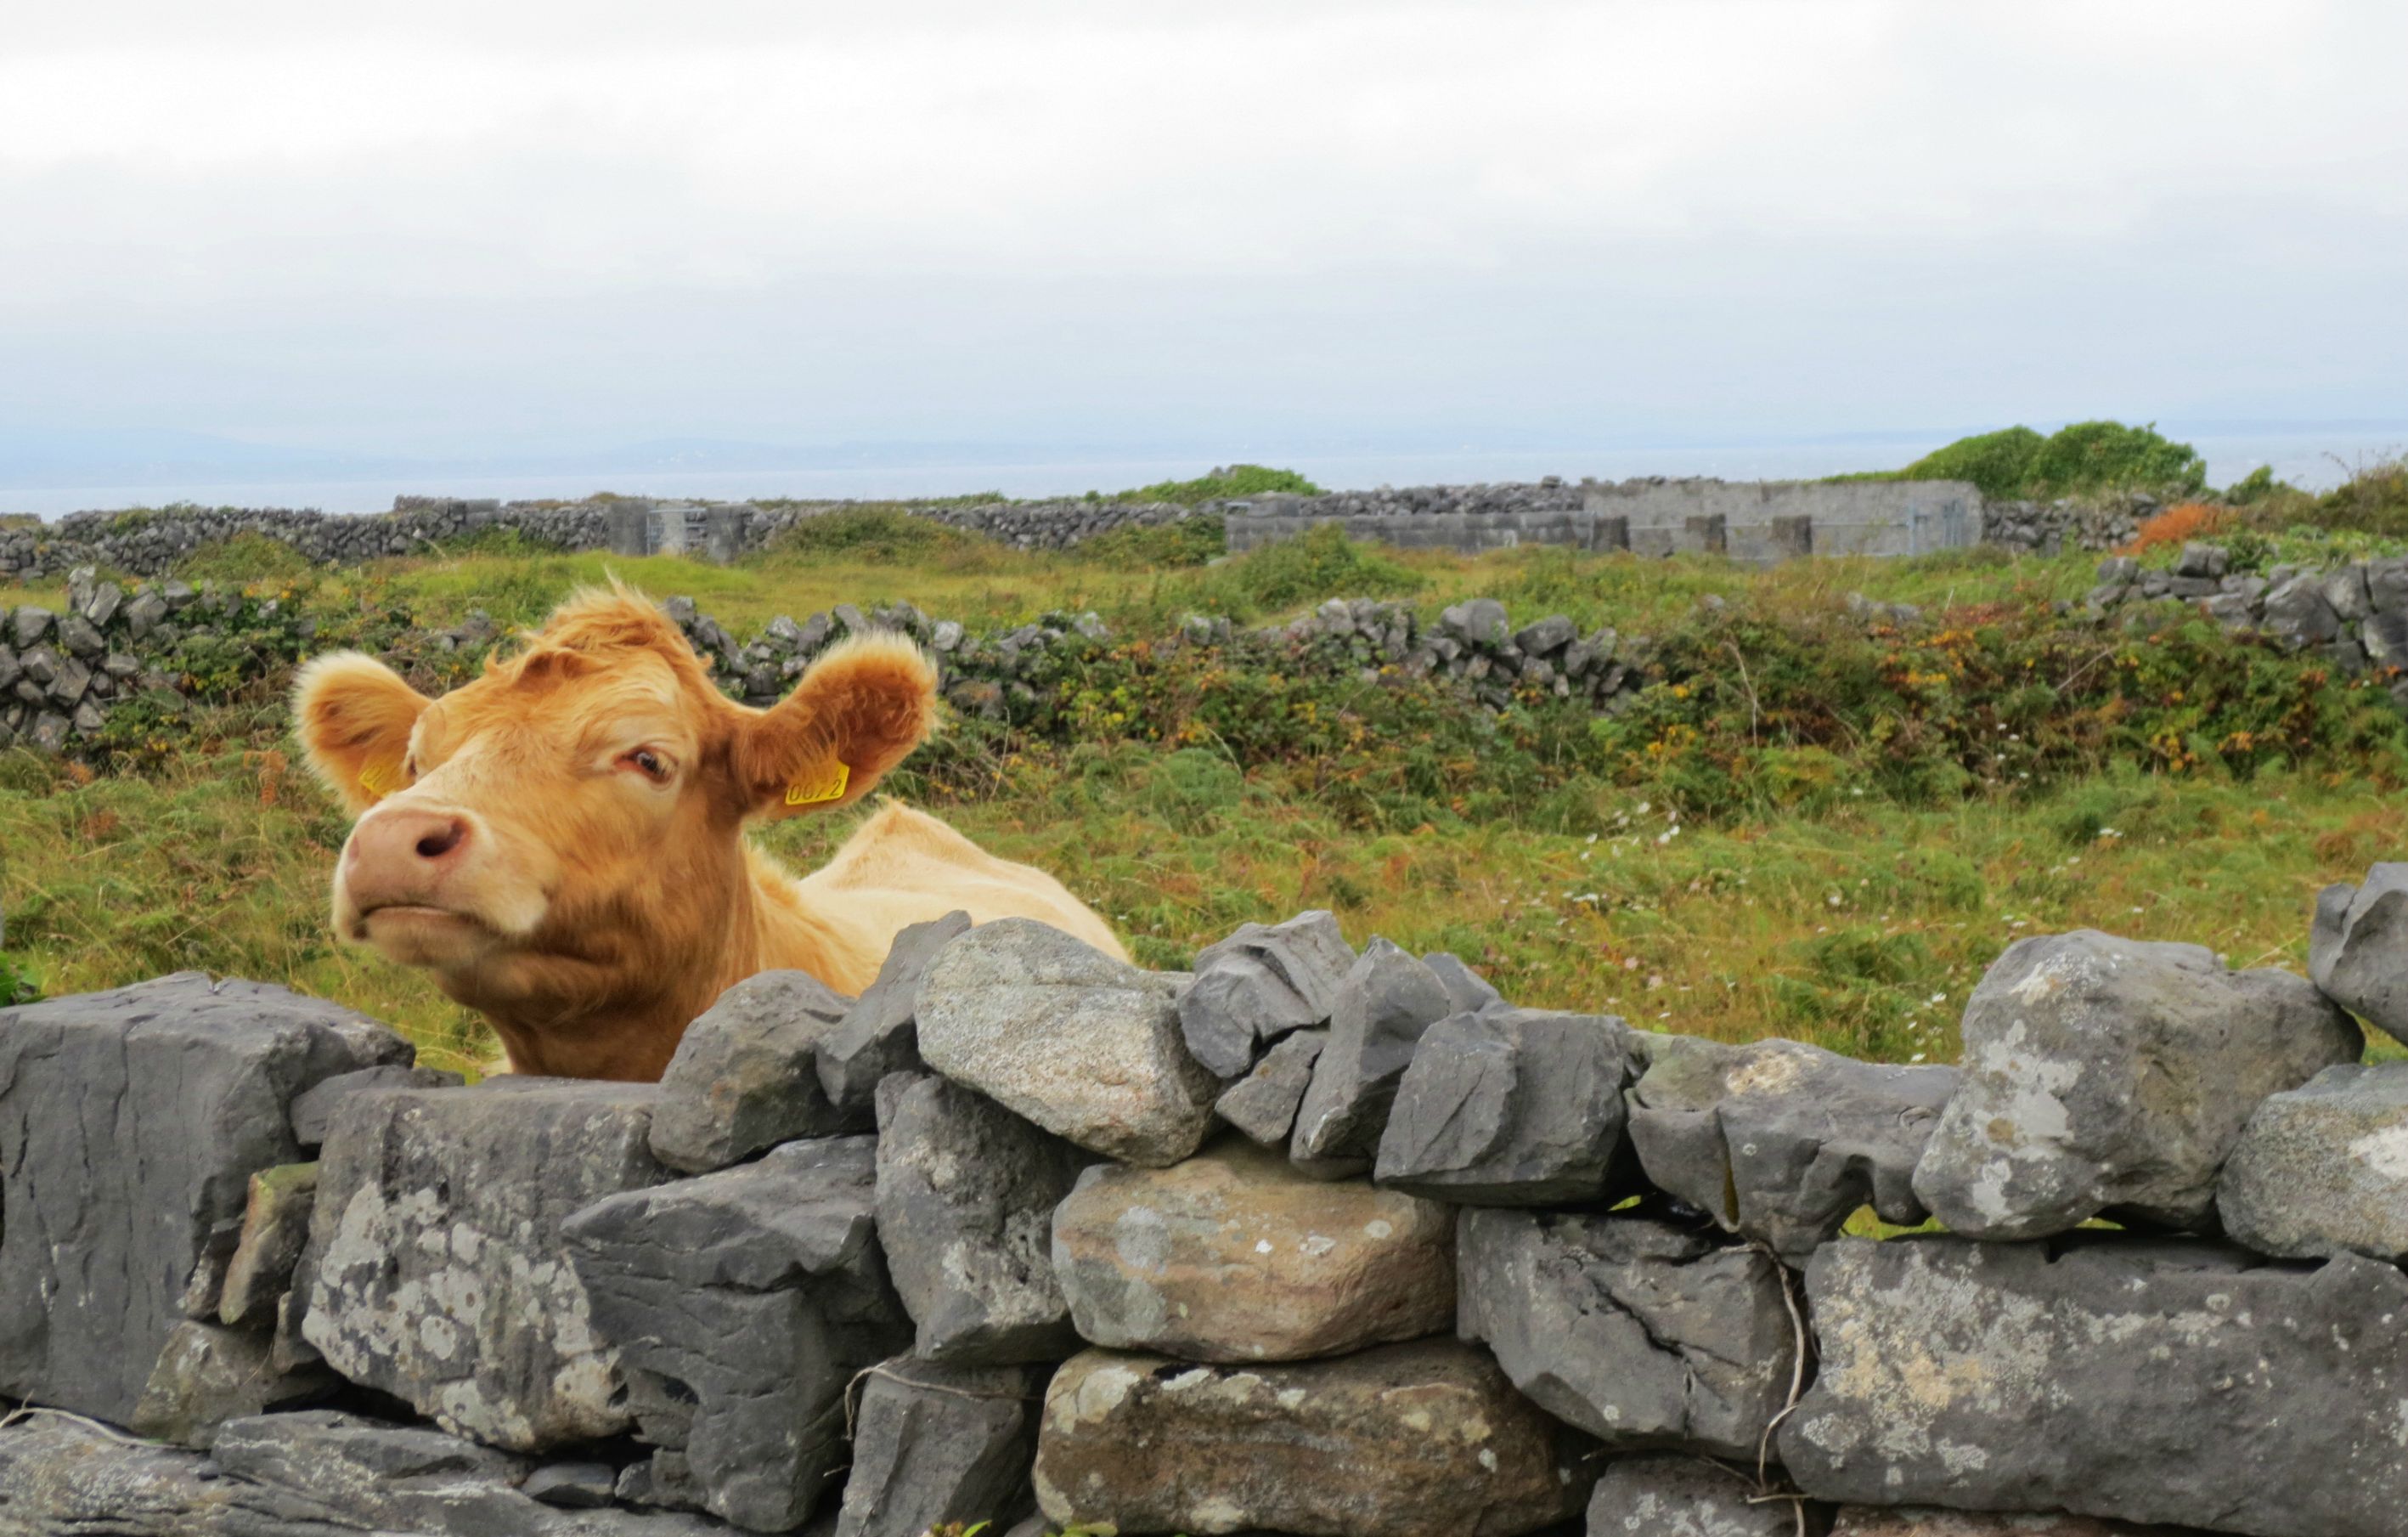 Calf looking over wall pic